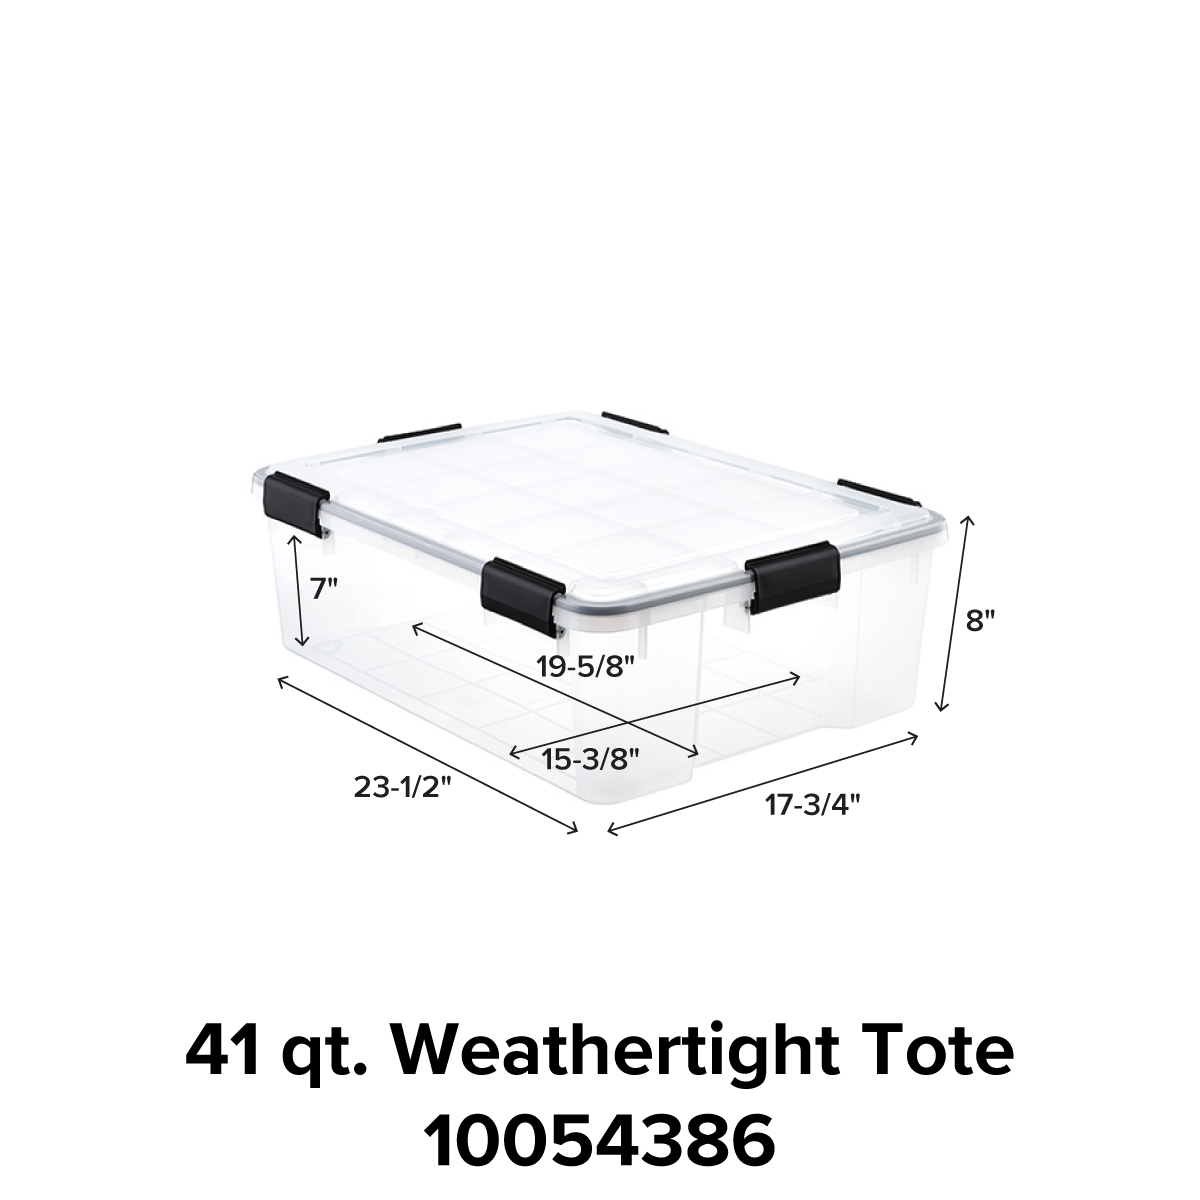 https://www.containerstore.com/catalogimages/480693/41qt_WeathertightTote_10054386.jpg